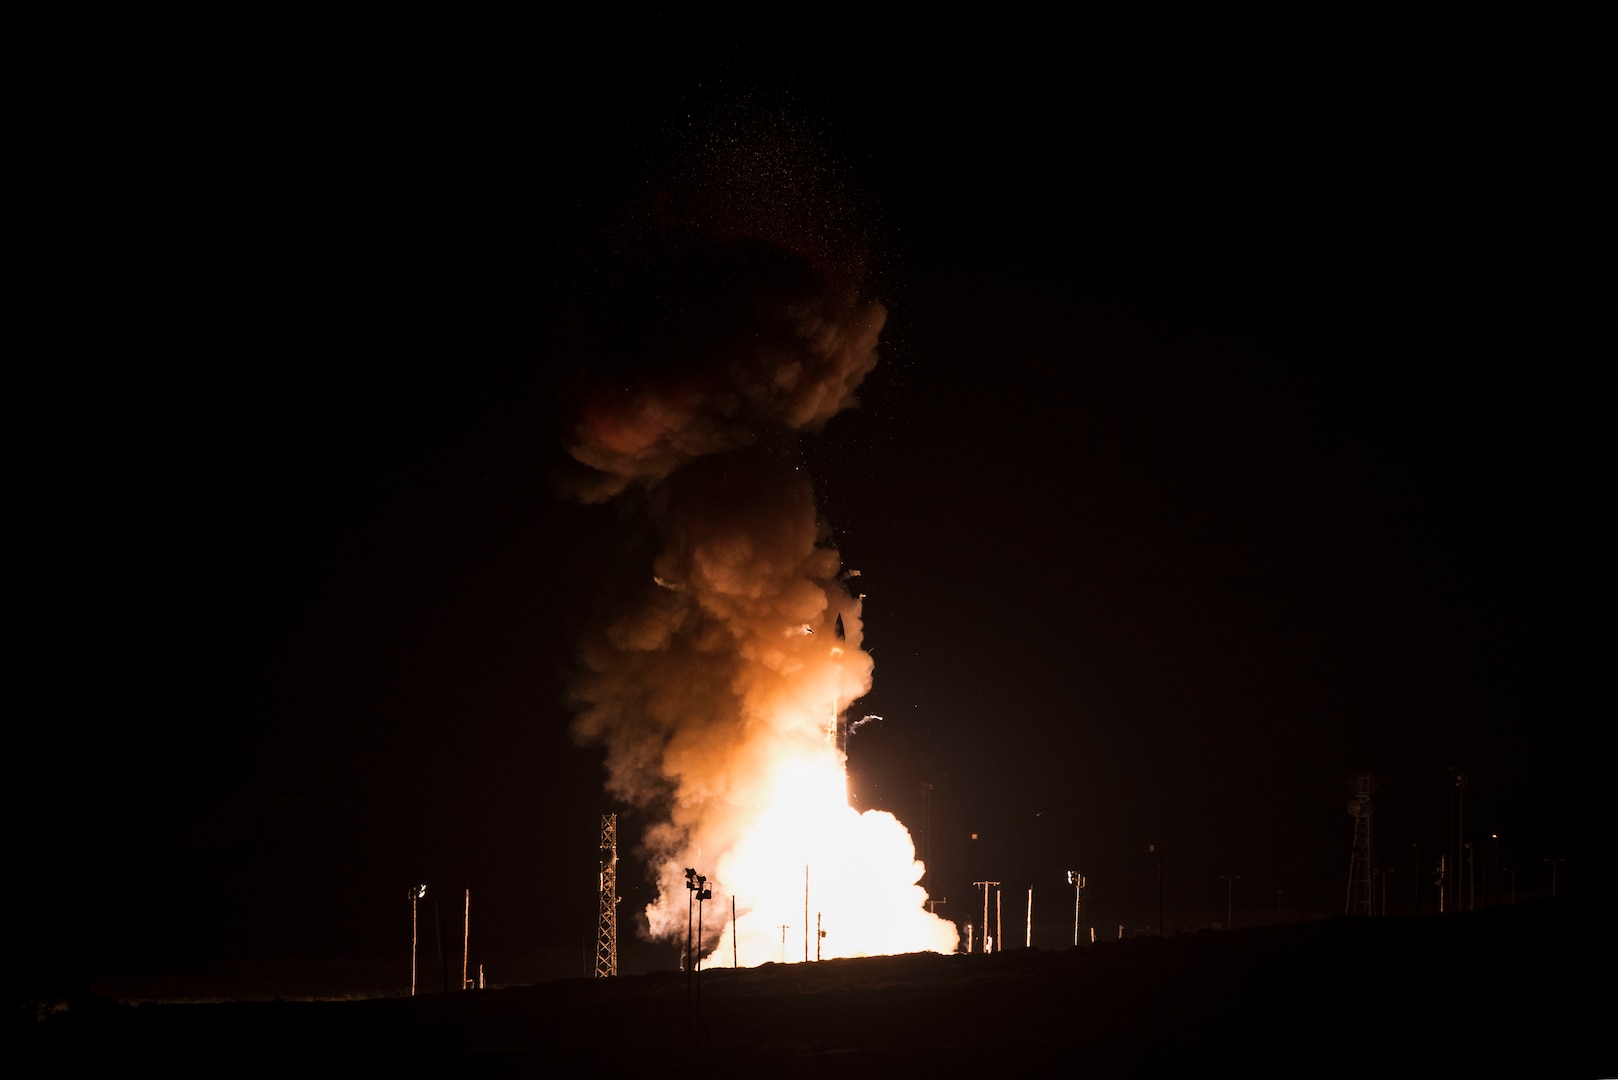 An unarmed Minuteman III intercontinental ballistic missile launches during a developmental test at 12:33 a.m. Pacific Time Wednesday, Feb. 5, 2020, at Vandenberg Air Force Base, Calif.